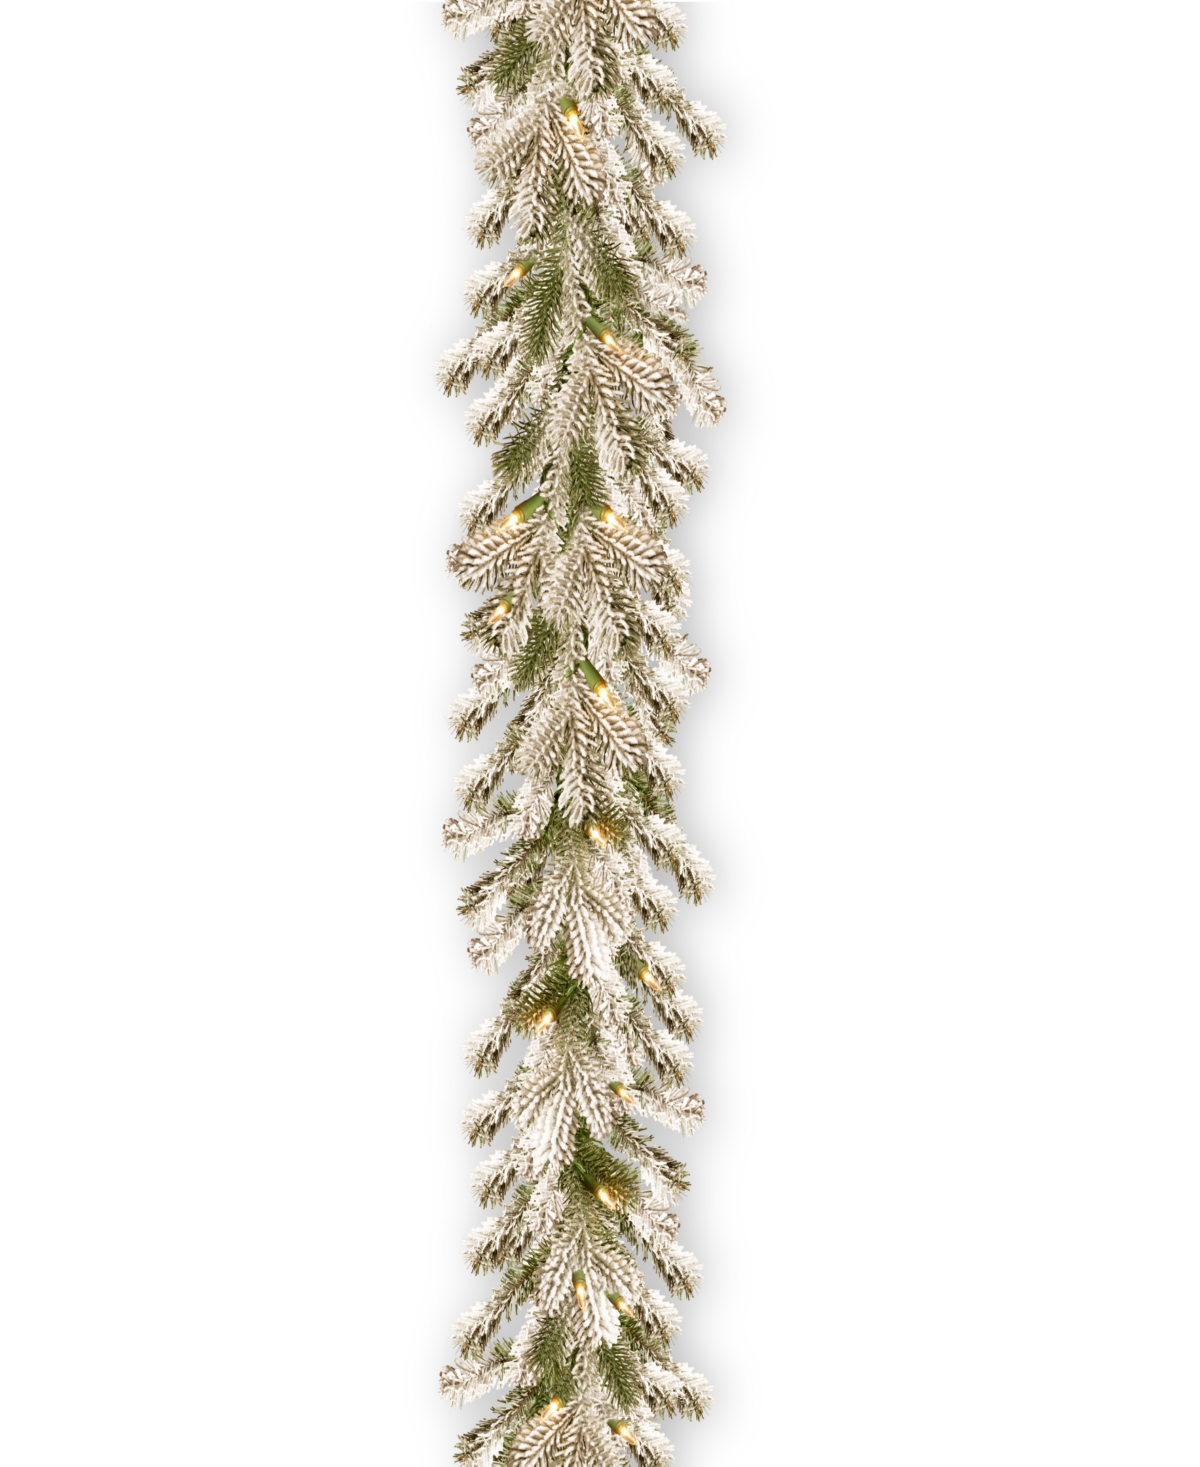 National Tree Company 9' Snowy Sheffield Spruce Garland With Twinkly Led Lights In Green